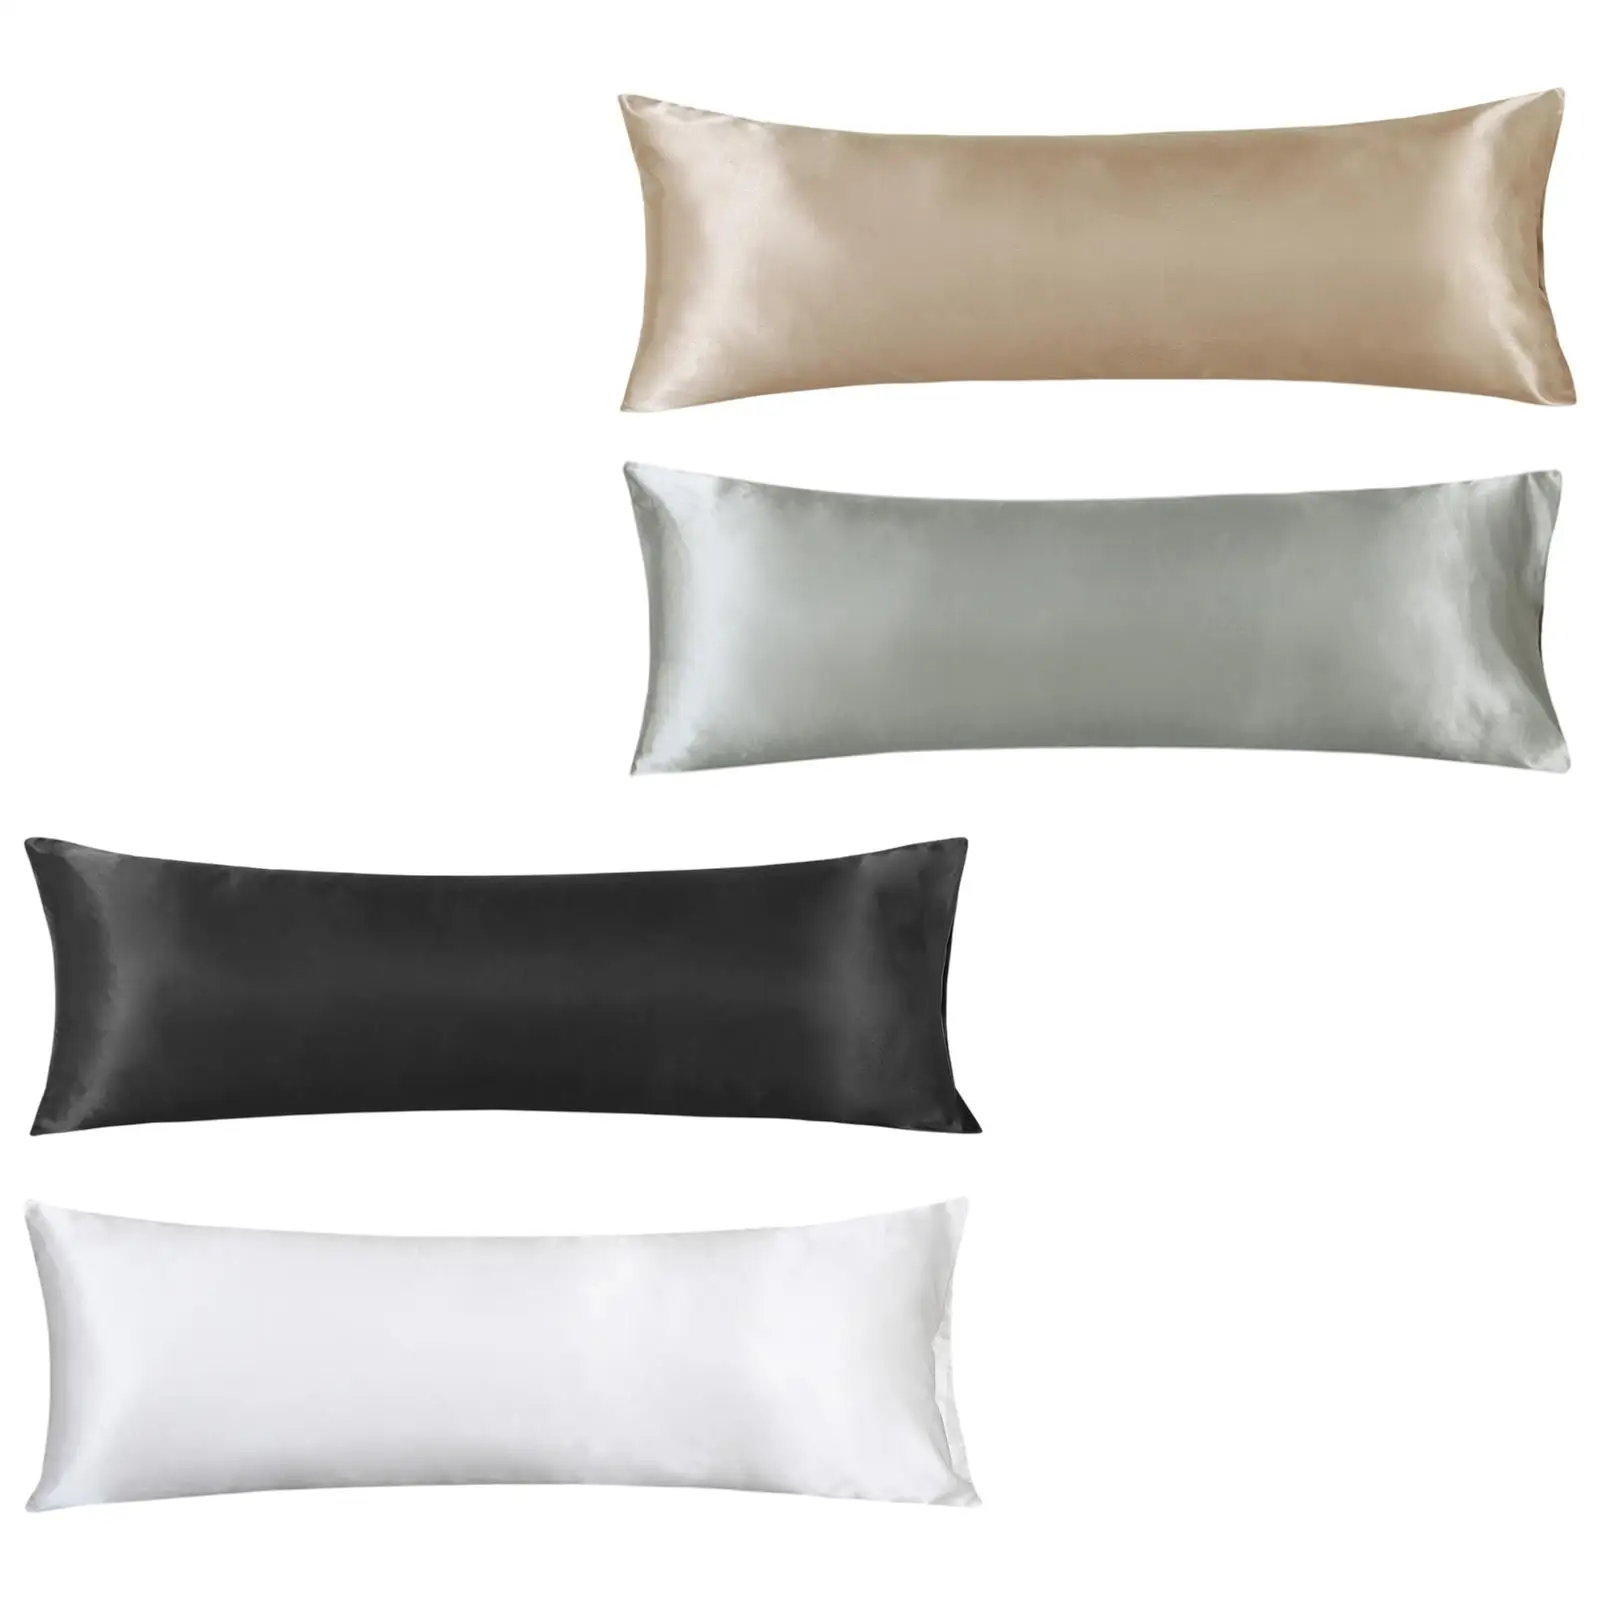 Pillow Cover Cooling Pillow Cases W/ No Zipper for Hotel Bedroom